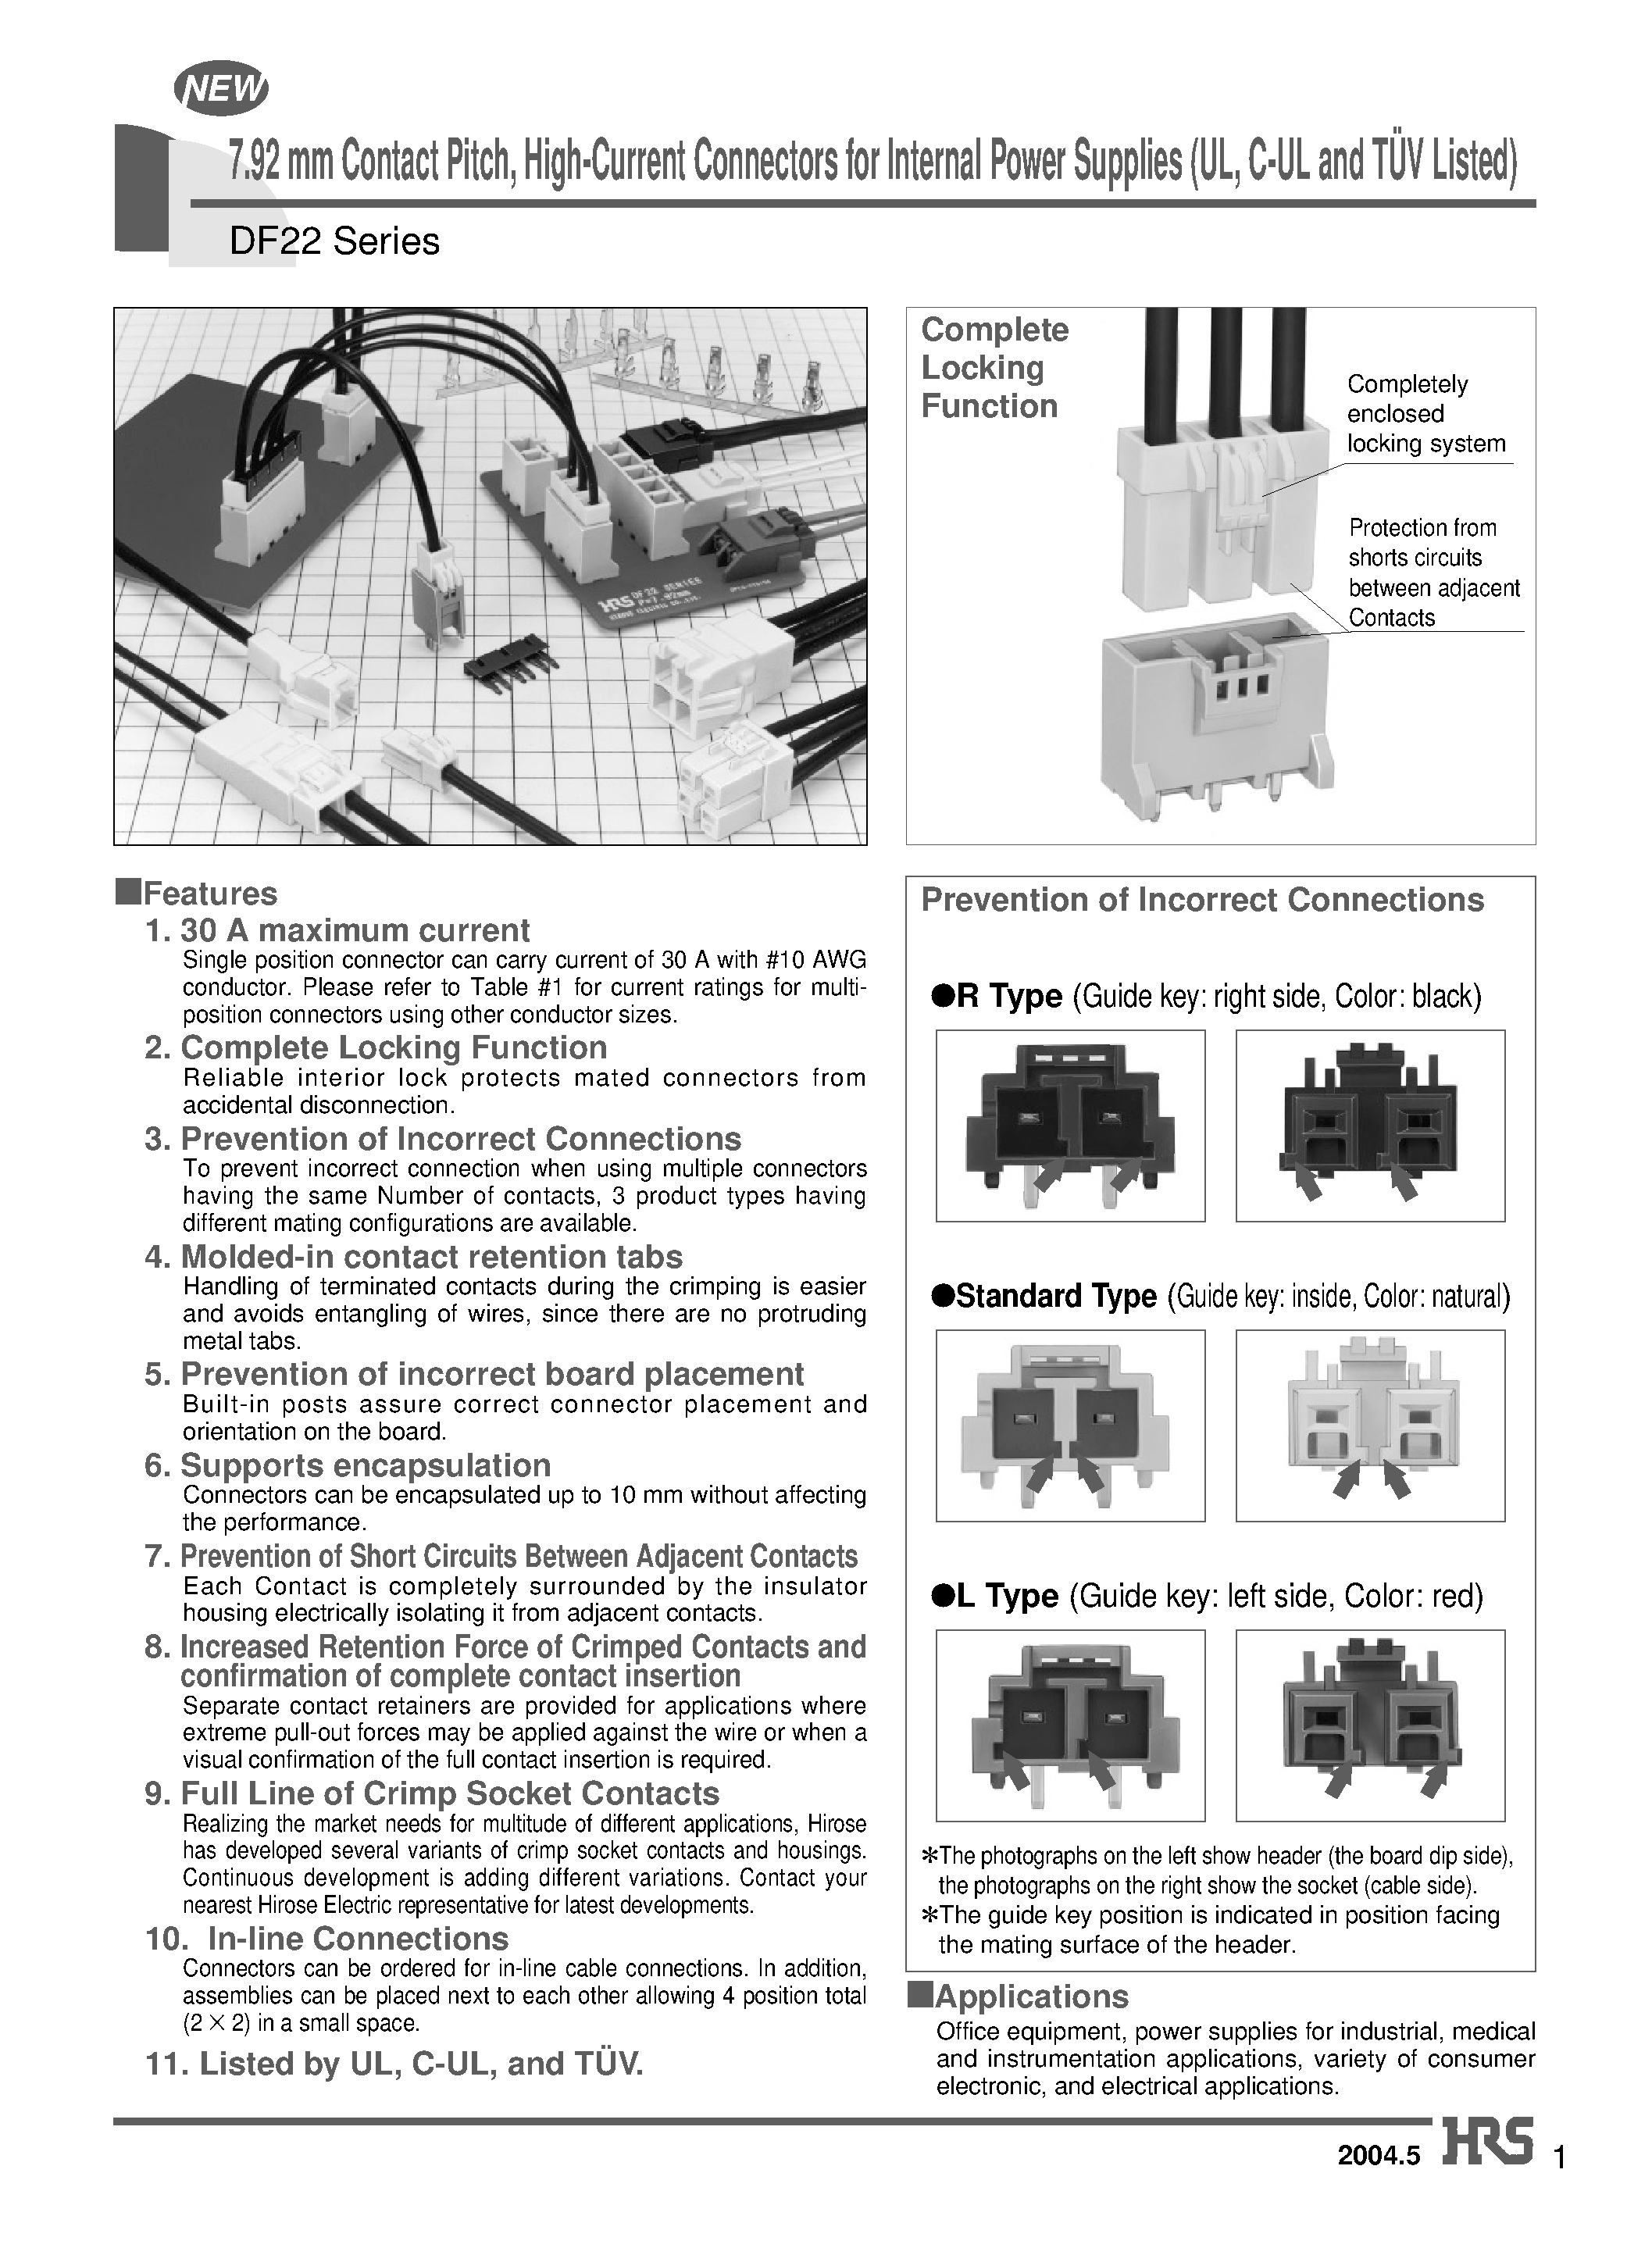 Datasheet DF22A-3P-7.92DSA - 7.92 mm Contact Pitch/ High-Current Connectors for Internal Power Supplies (UL/ C-UL and TUV Listed) page 1